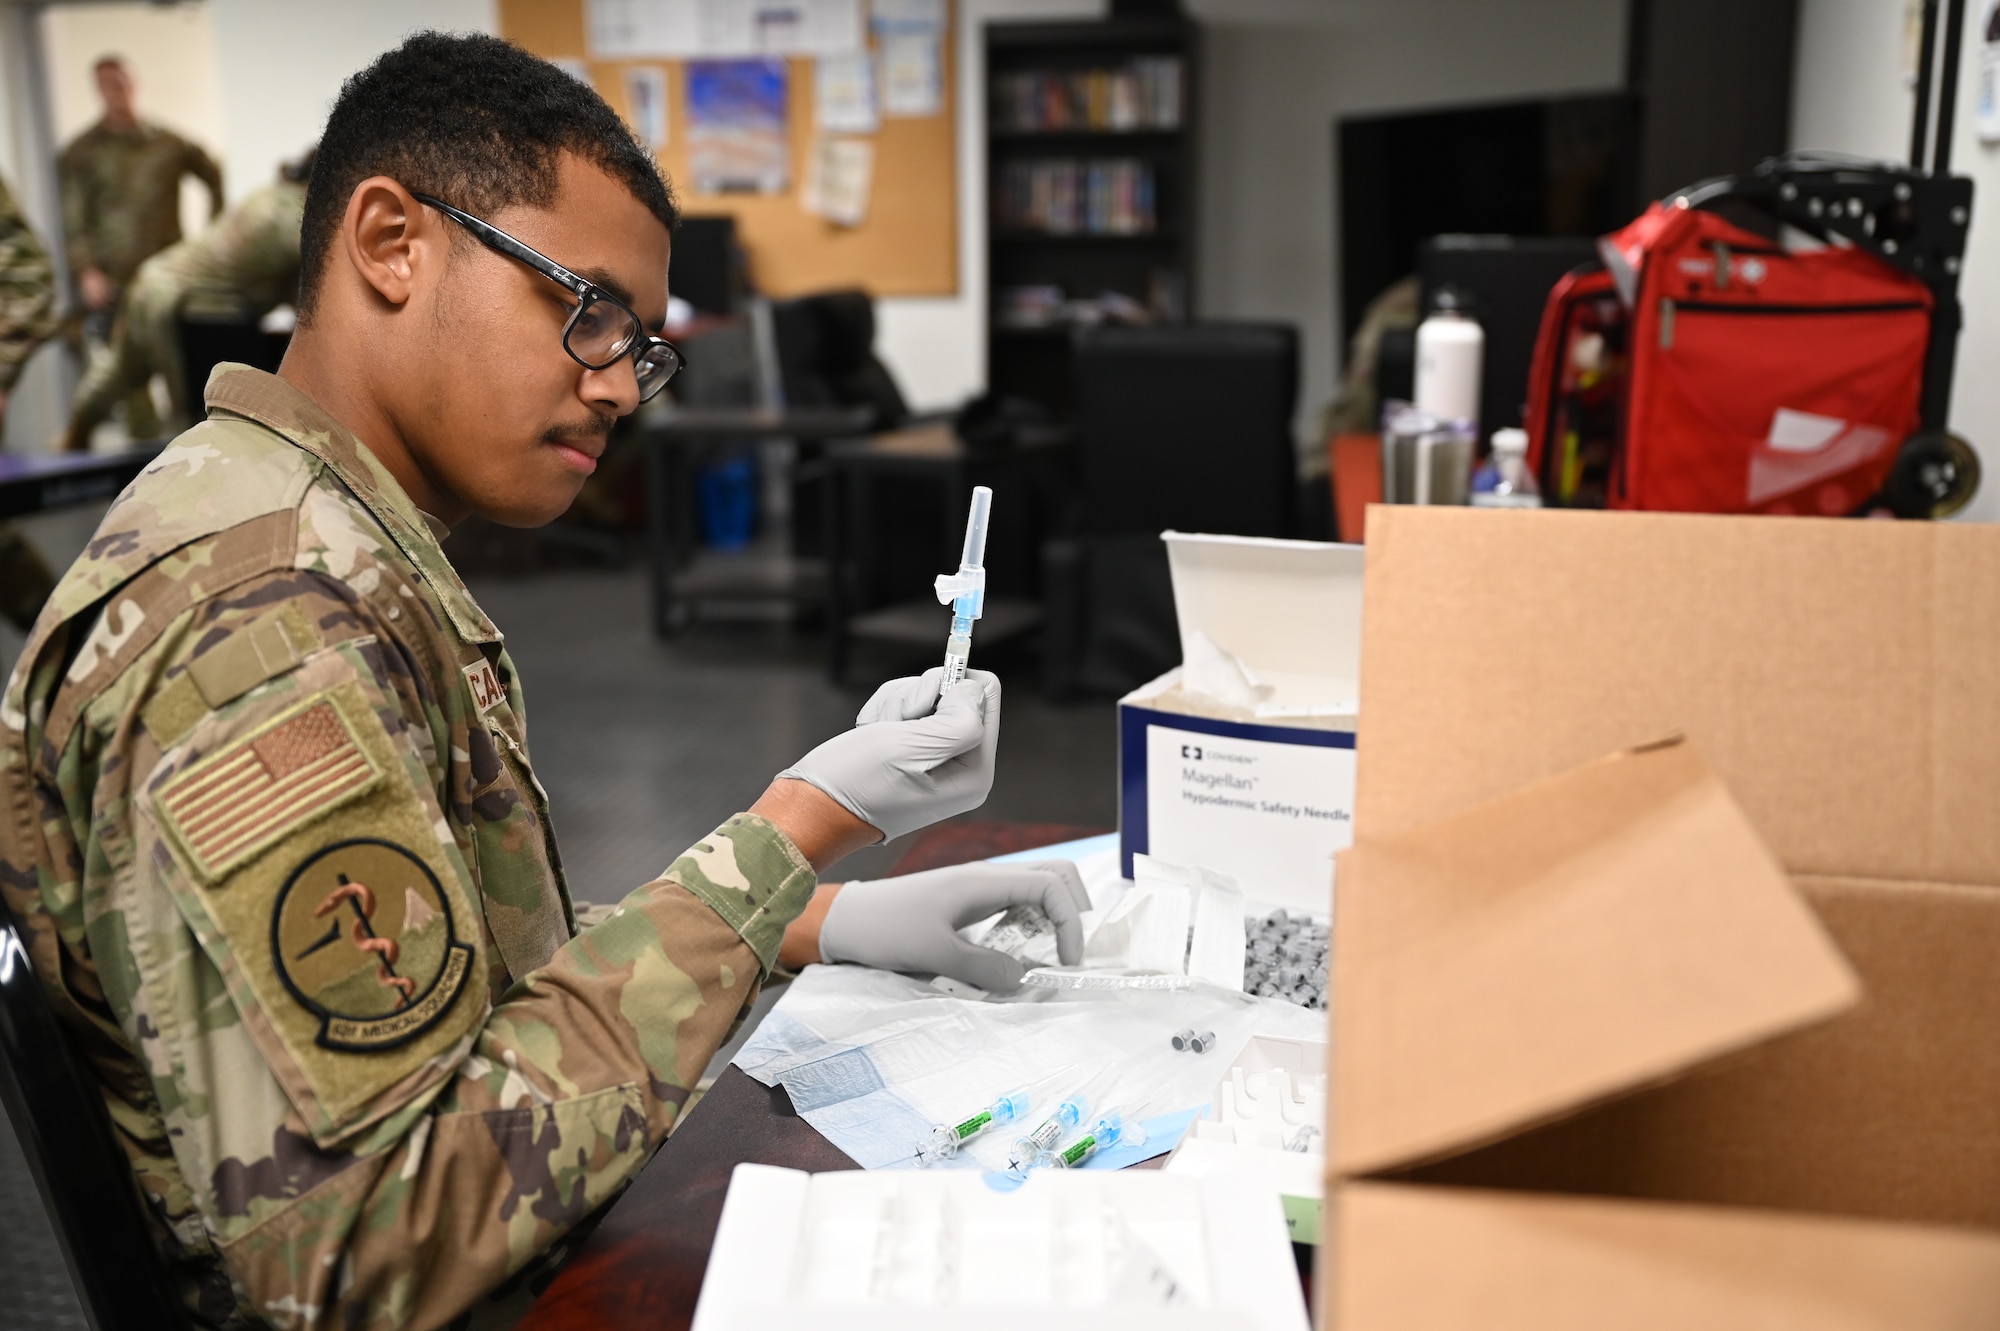 U.S. Air Force Staff Sgt. Kevin Ricard, an aerospace medical technician with the 62d medical squadron, prepares the flu vaccine at Joint Base Lewis-McChord, Wash., Nov. 2, 2023. Service members are required to stay up to date with their vaccinations to avoid mission roadblocks caused by the spread of the flu virus. (U.S. Air Force photo by Airman 1st Class Kylee Tyus)